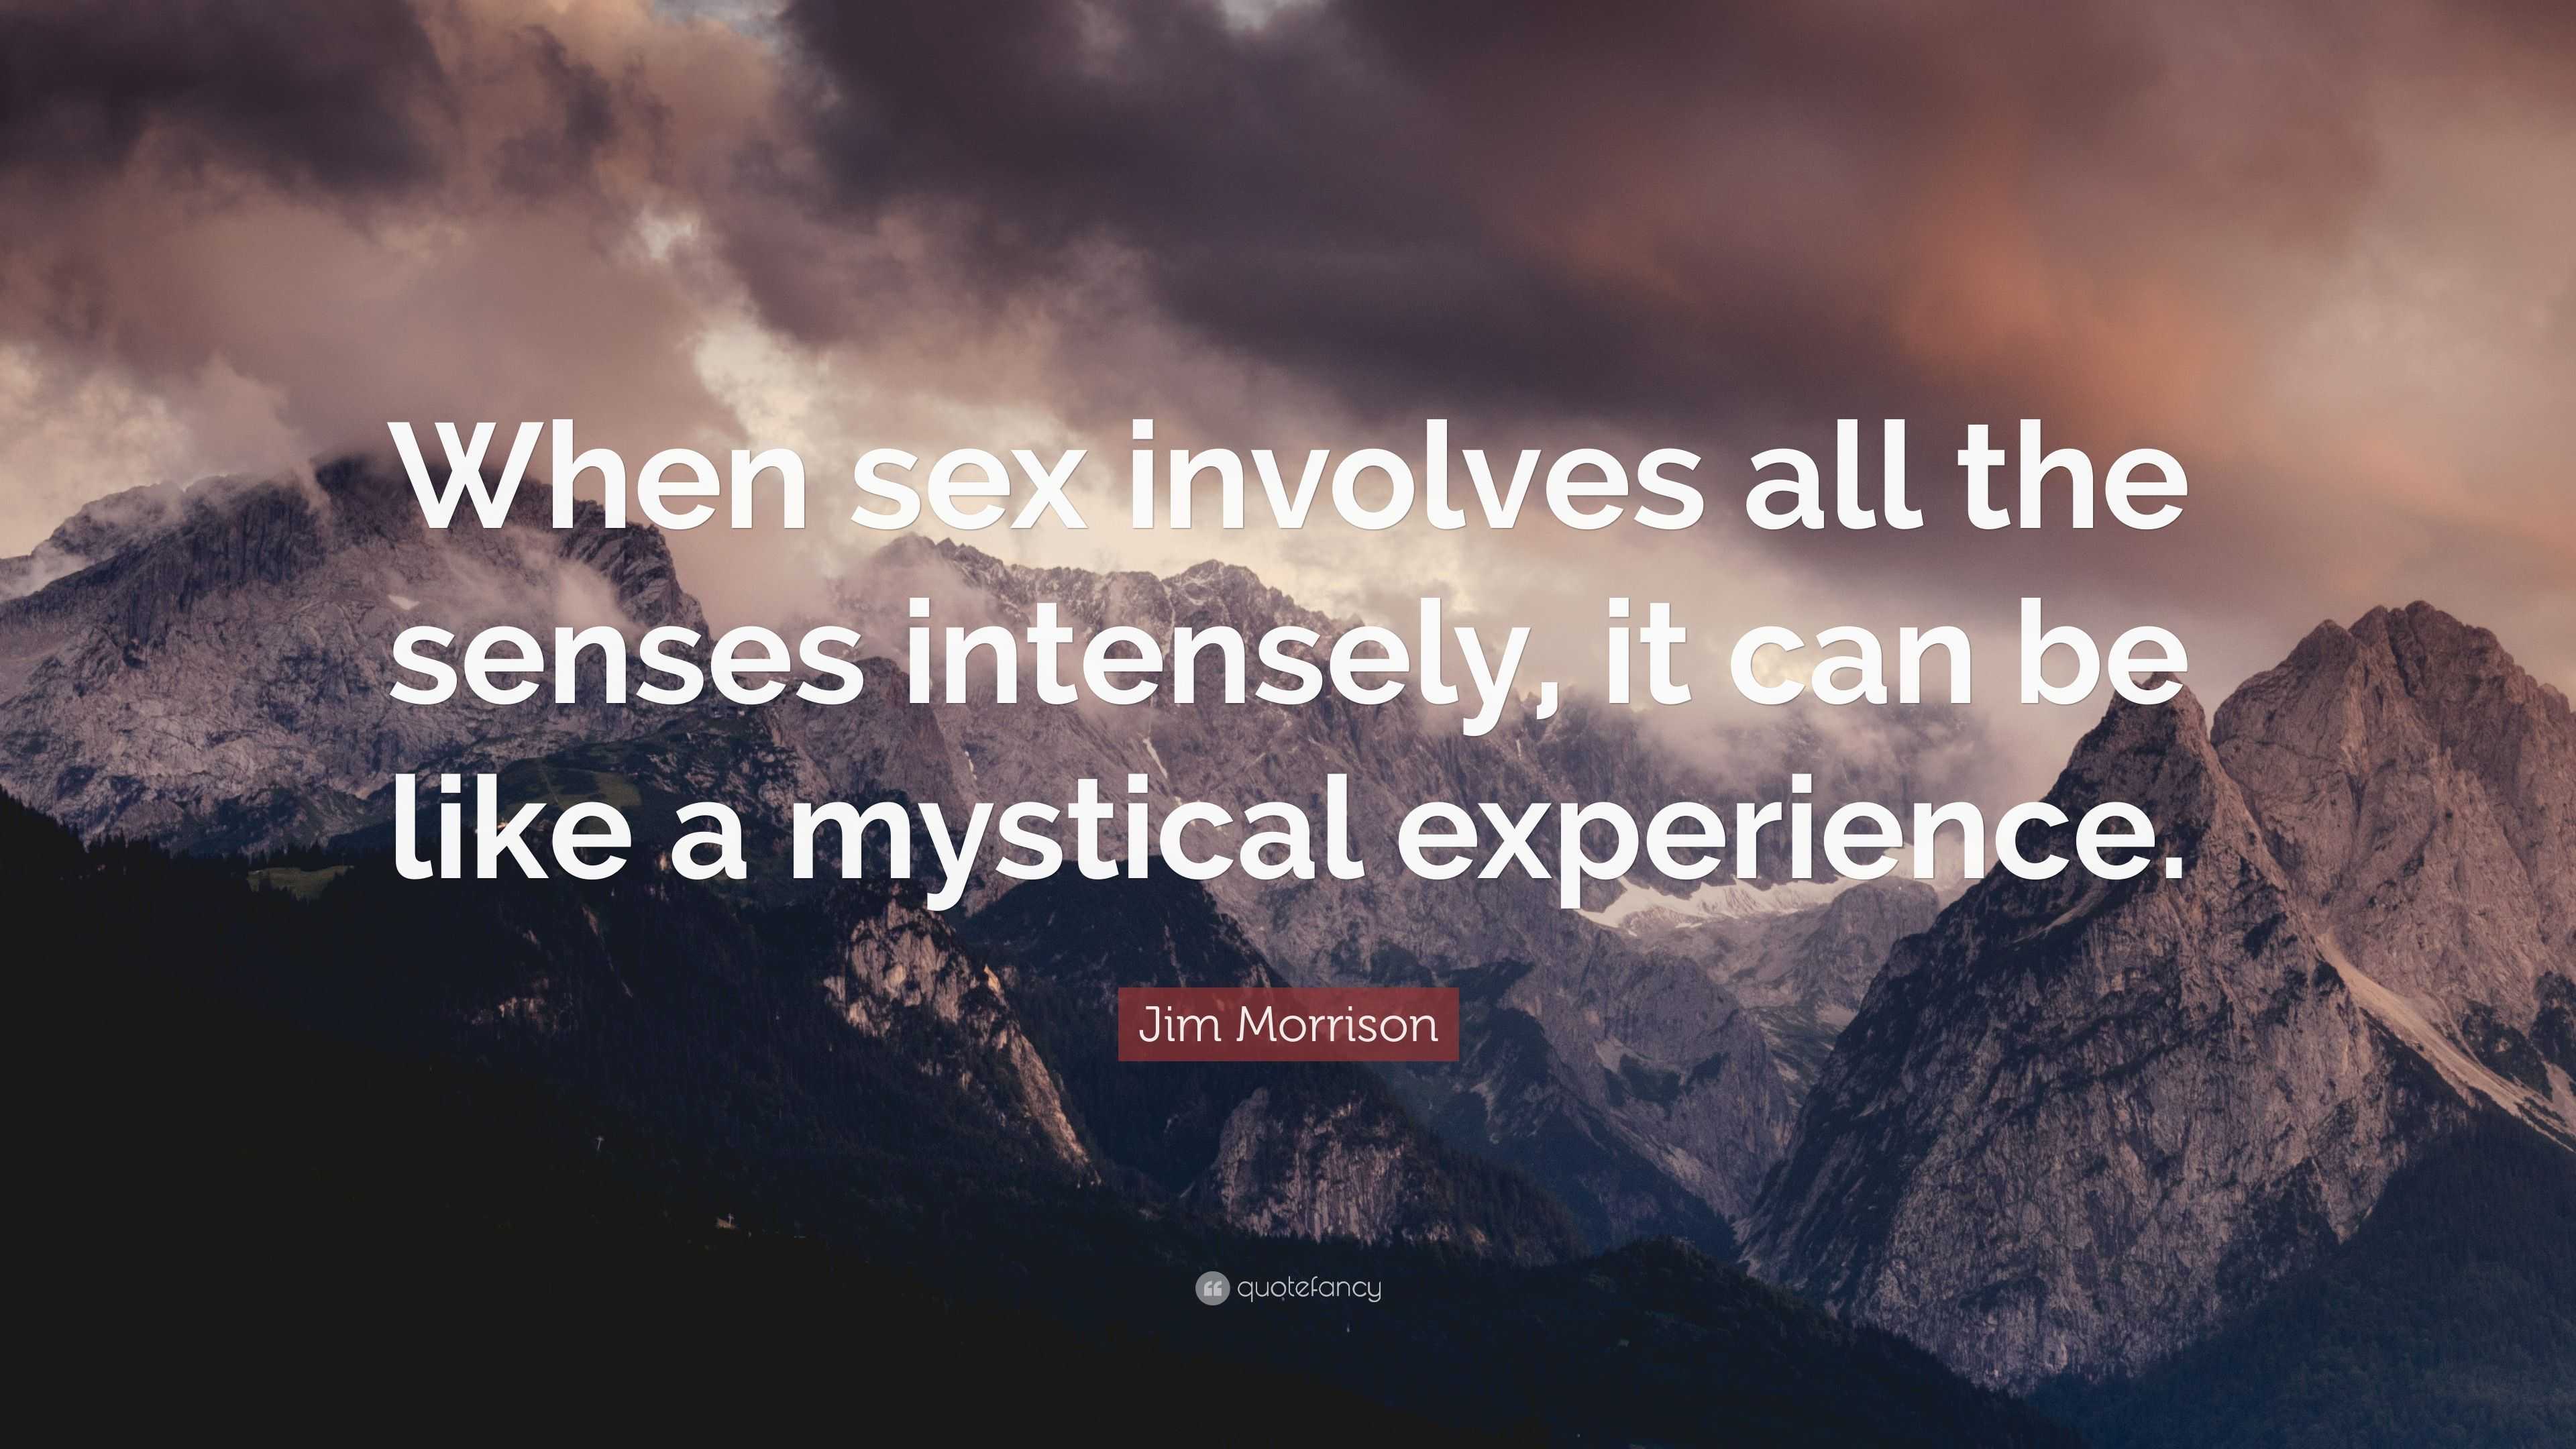 Jim Morrison Quote: “When sex involves all the senses intensely, it can